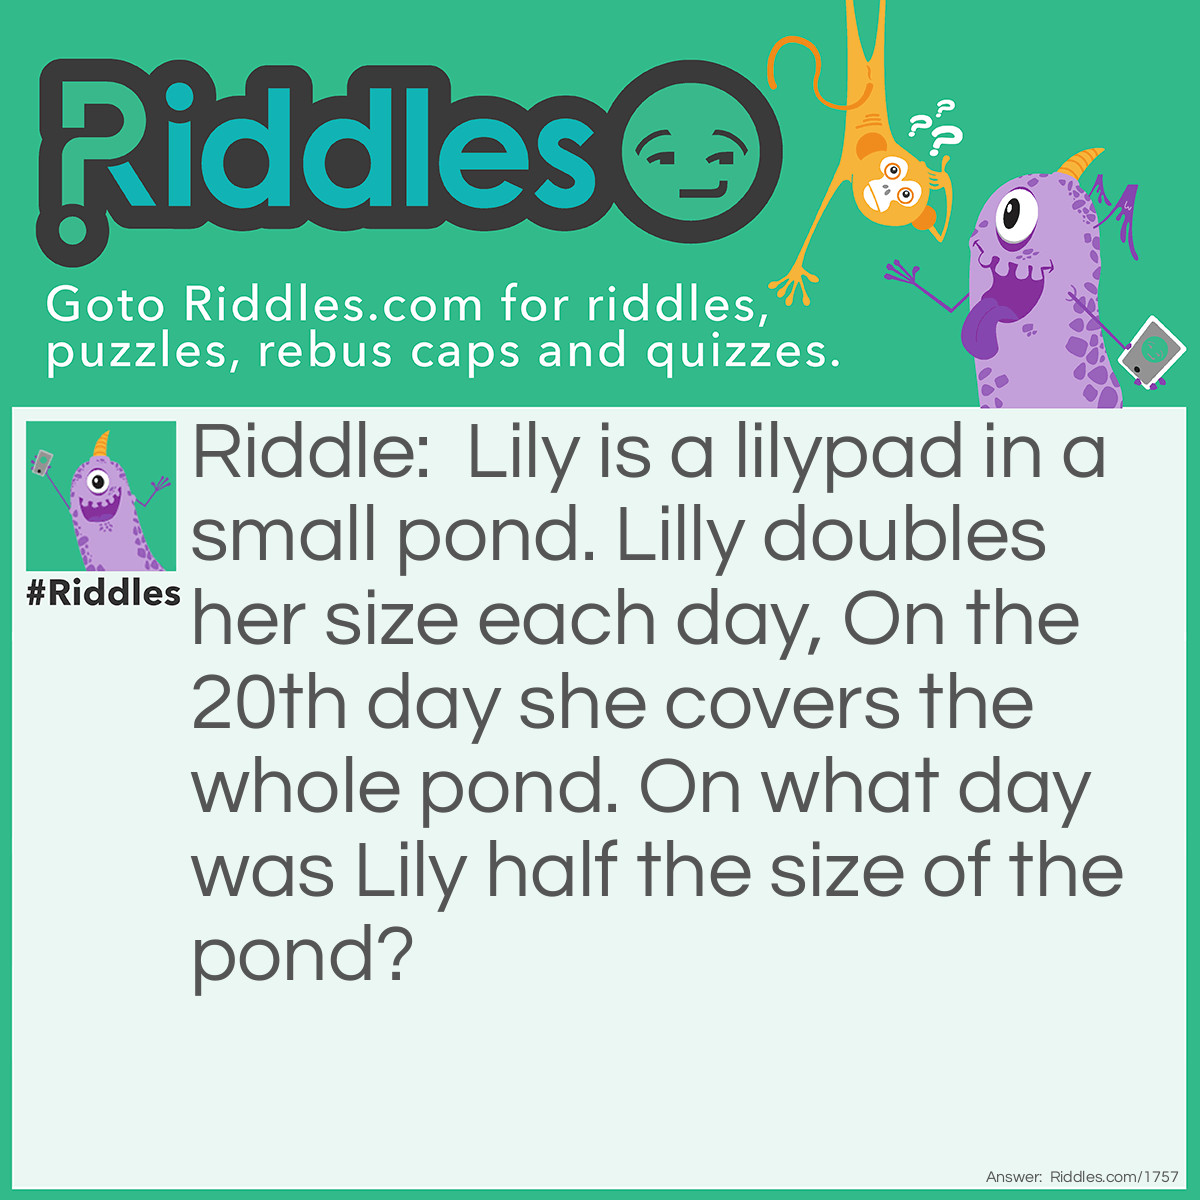 Riddle: Lily is a lilypad in a small pond. Lilly doubles her size each day, On the 20th day she covers the whole pond. On what day was Lily half the size of the pond? Answer: Day 19, it's not 10 because on day 20 she doubled from day 19, so 19 must be half the size of the pond.